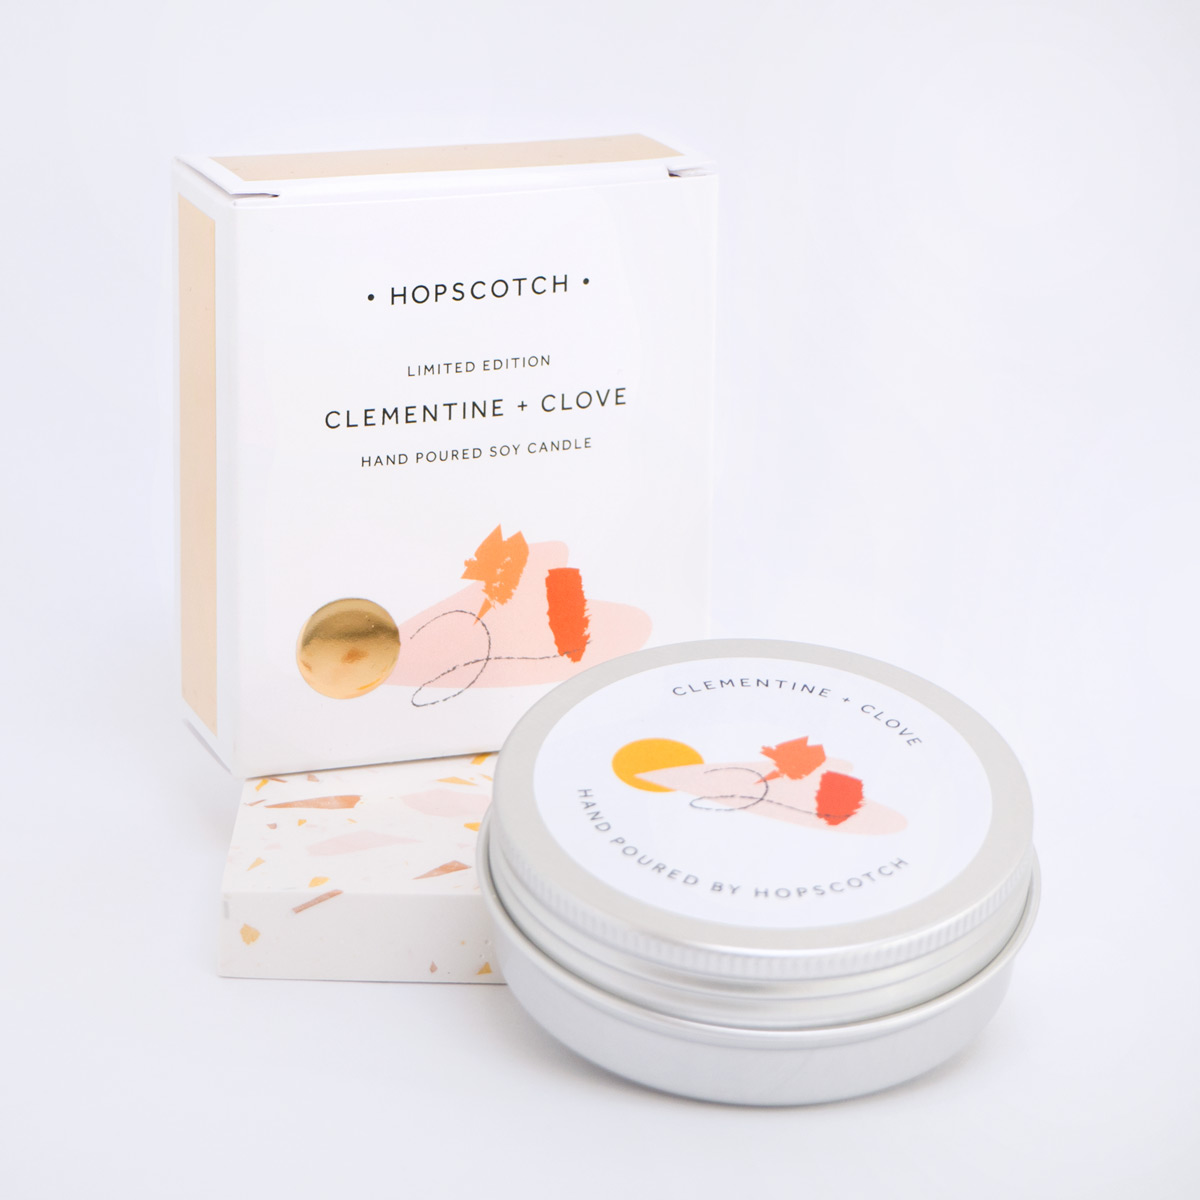 Ltd Edition Clementine + Clove Scented Soy Candle